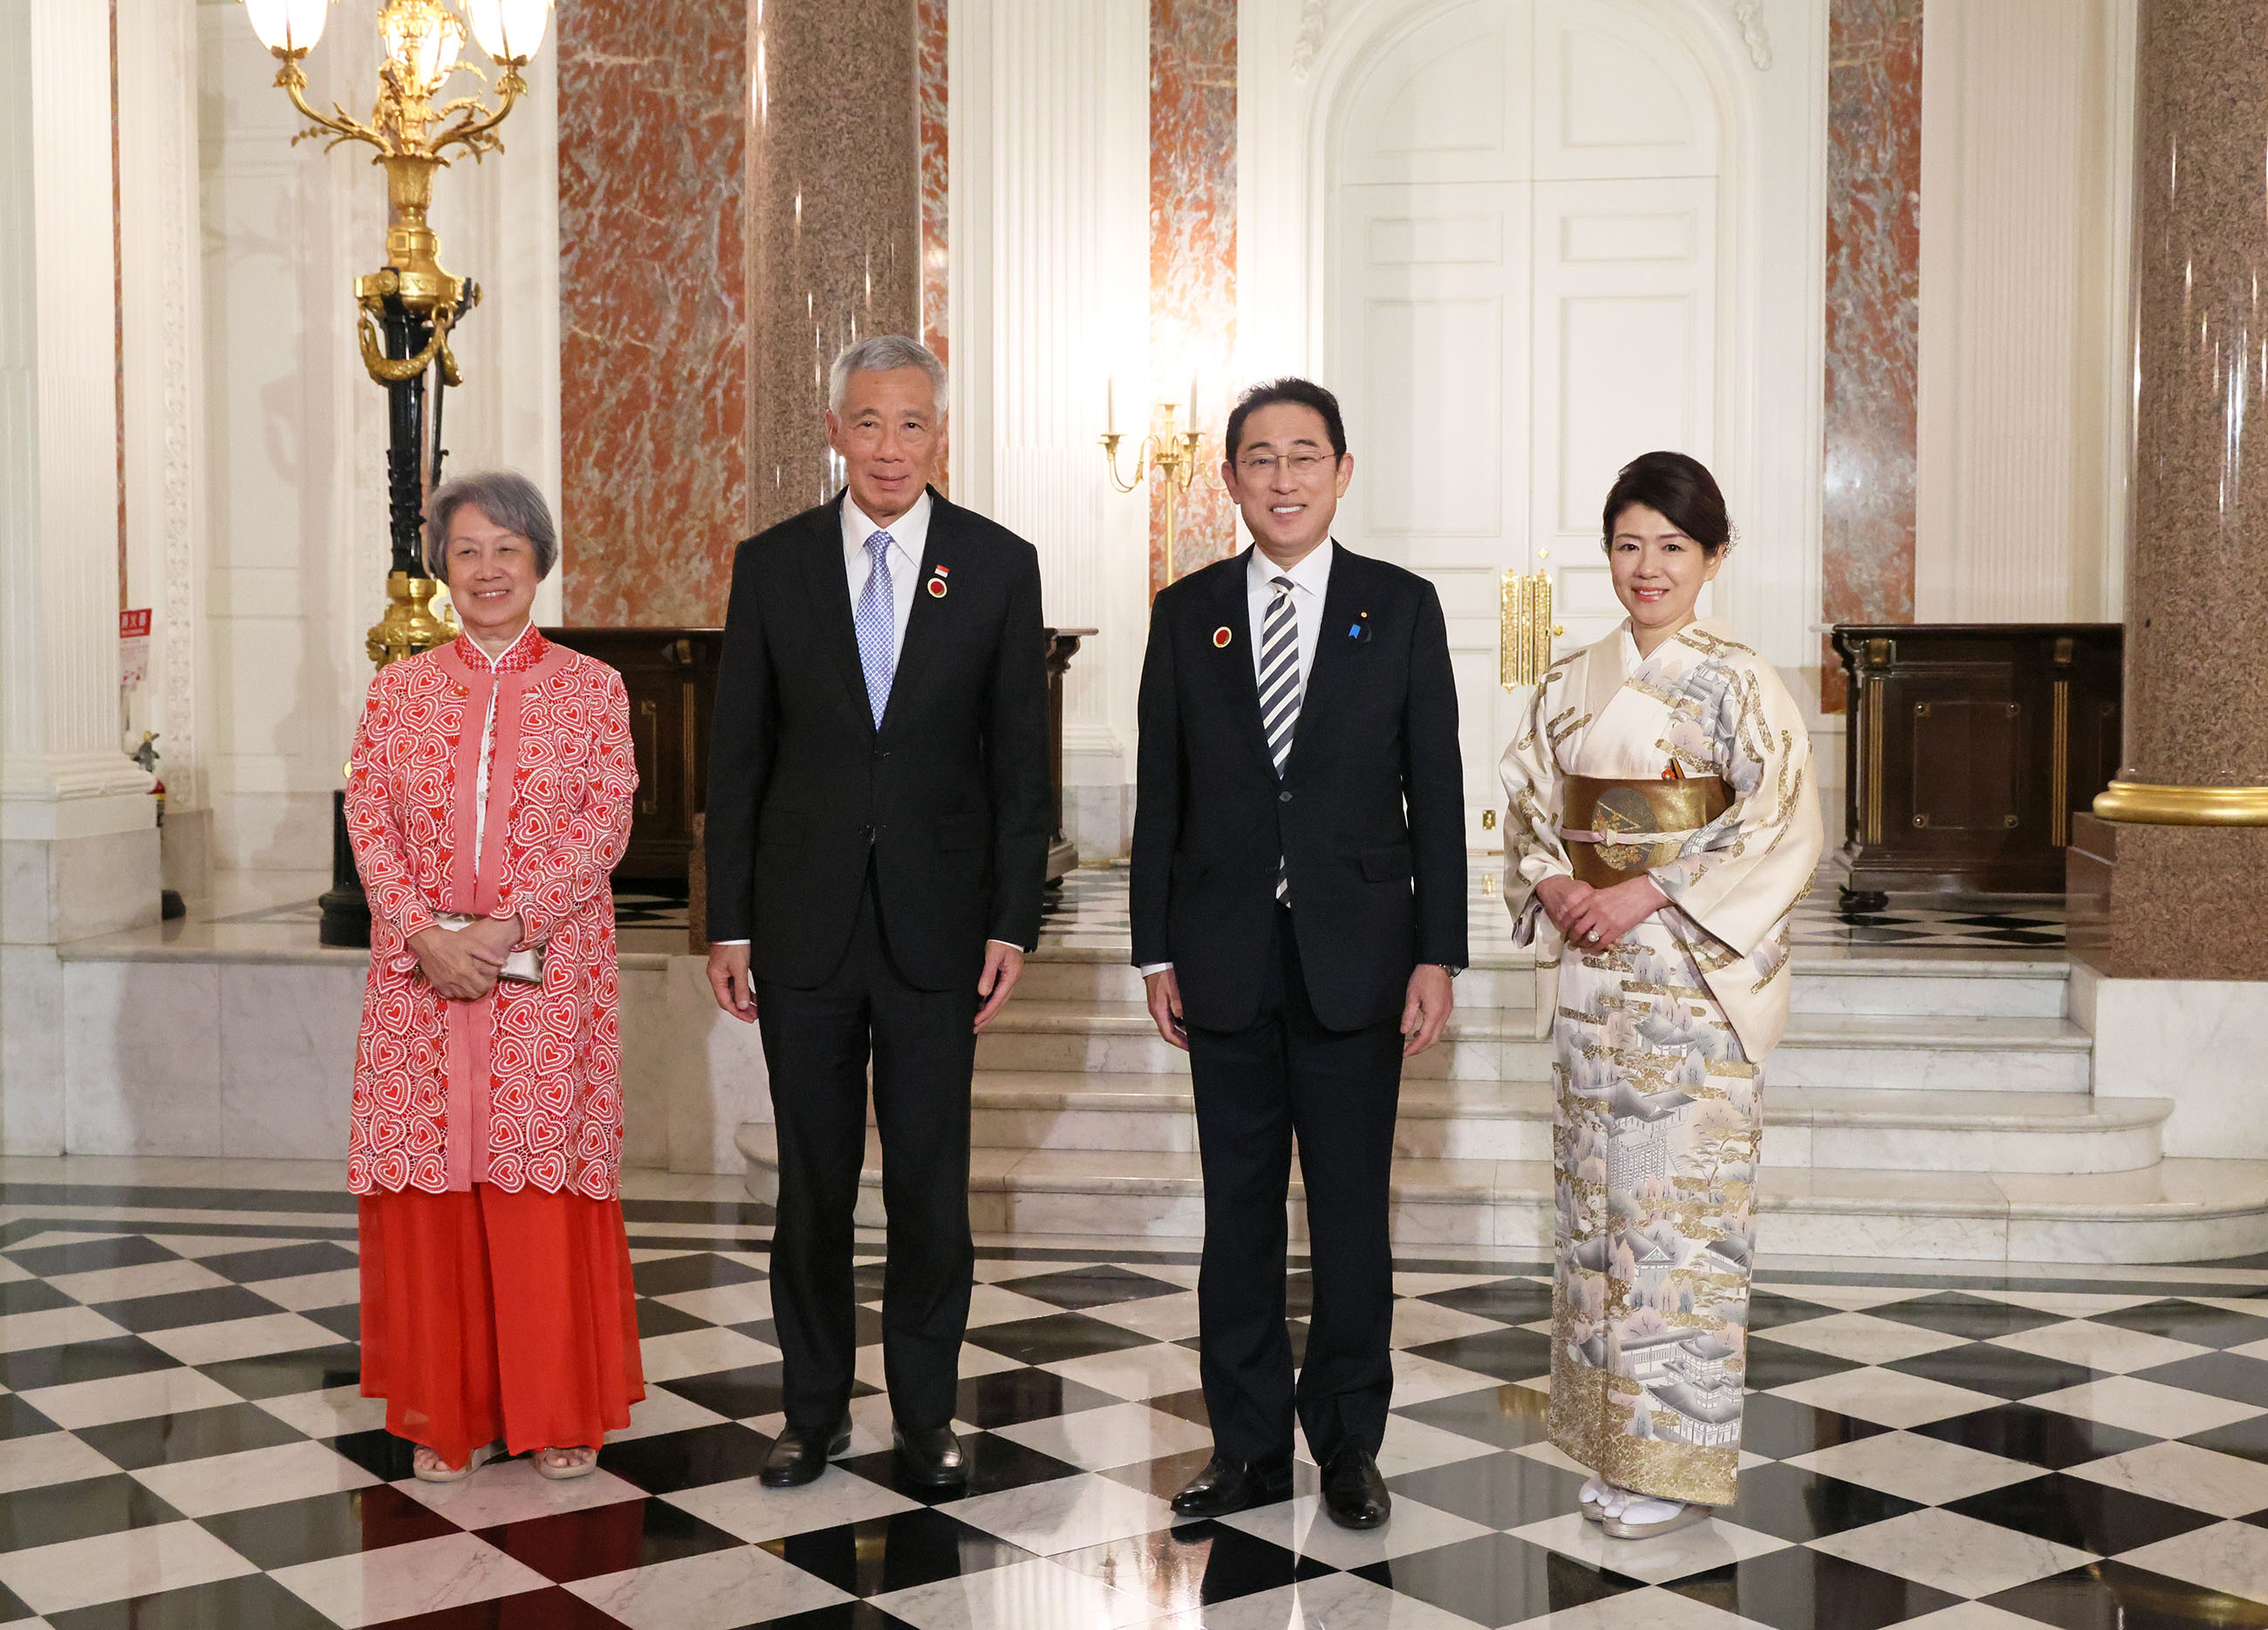 Prime Minister Kishida welcoming Prime Minister Lee of the Republic of Singapore and spouse